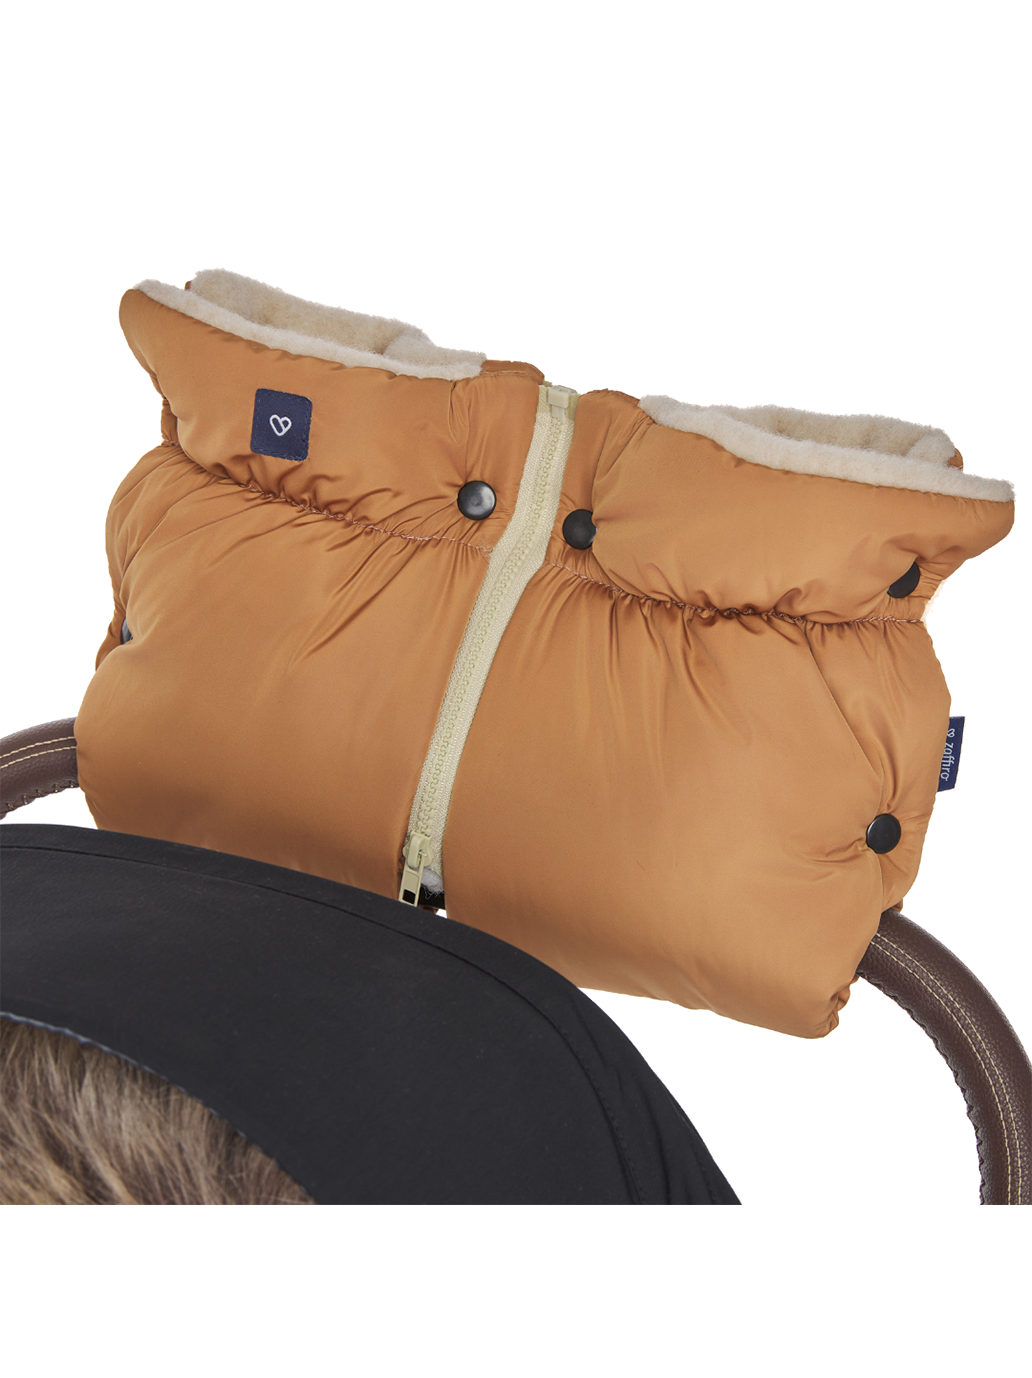 waterproof muffs for a pram with sheep's wool